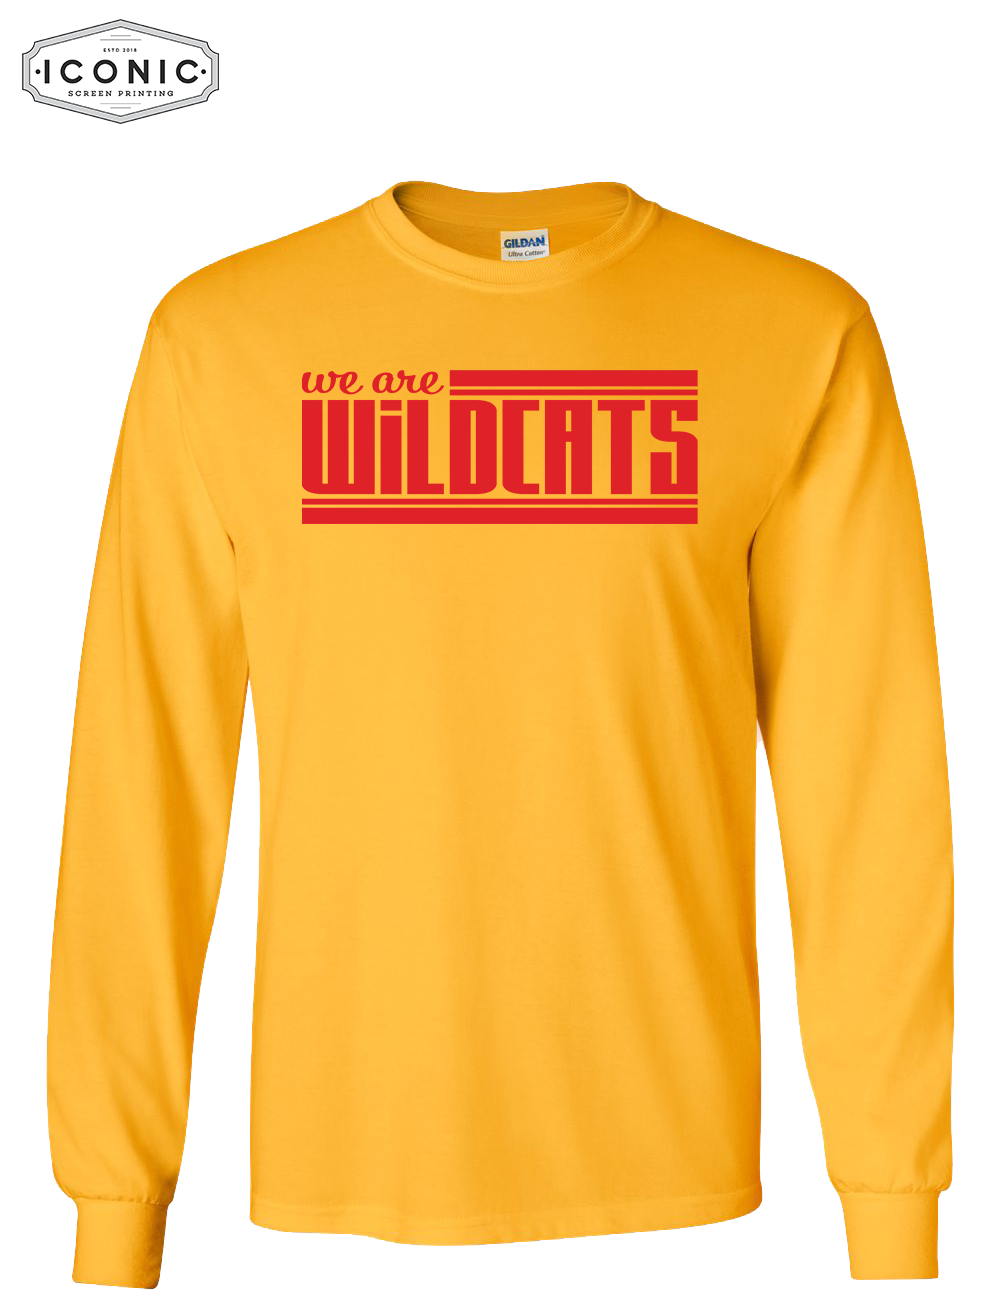 We Are Wildcats - Ultra Cotton Long Sleeve